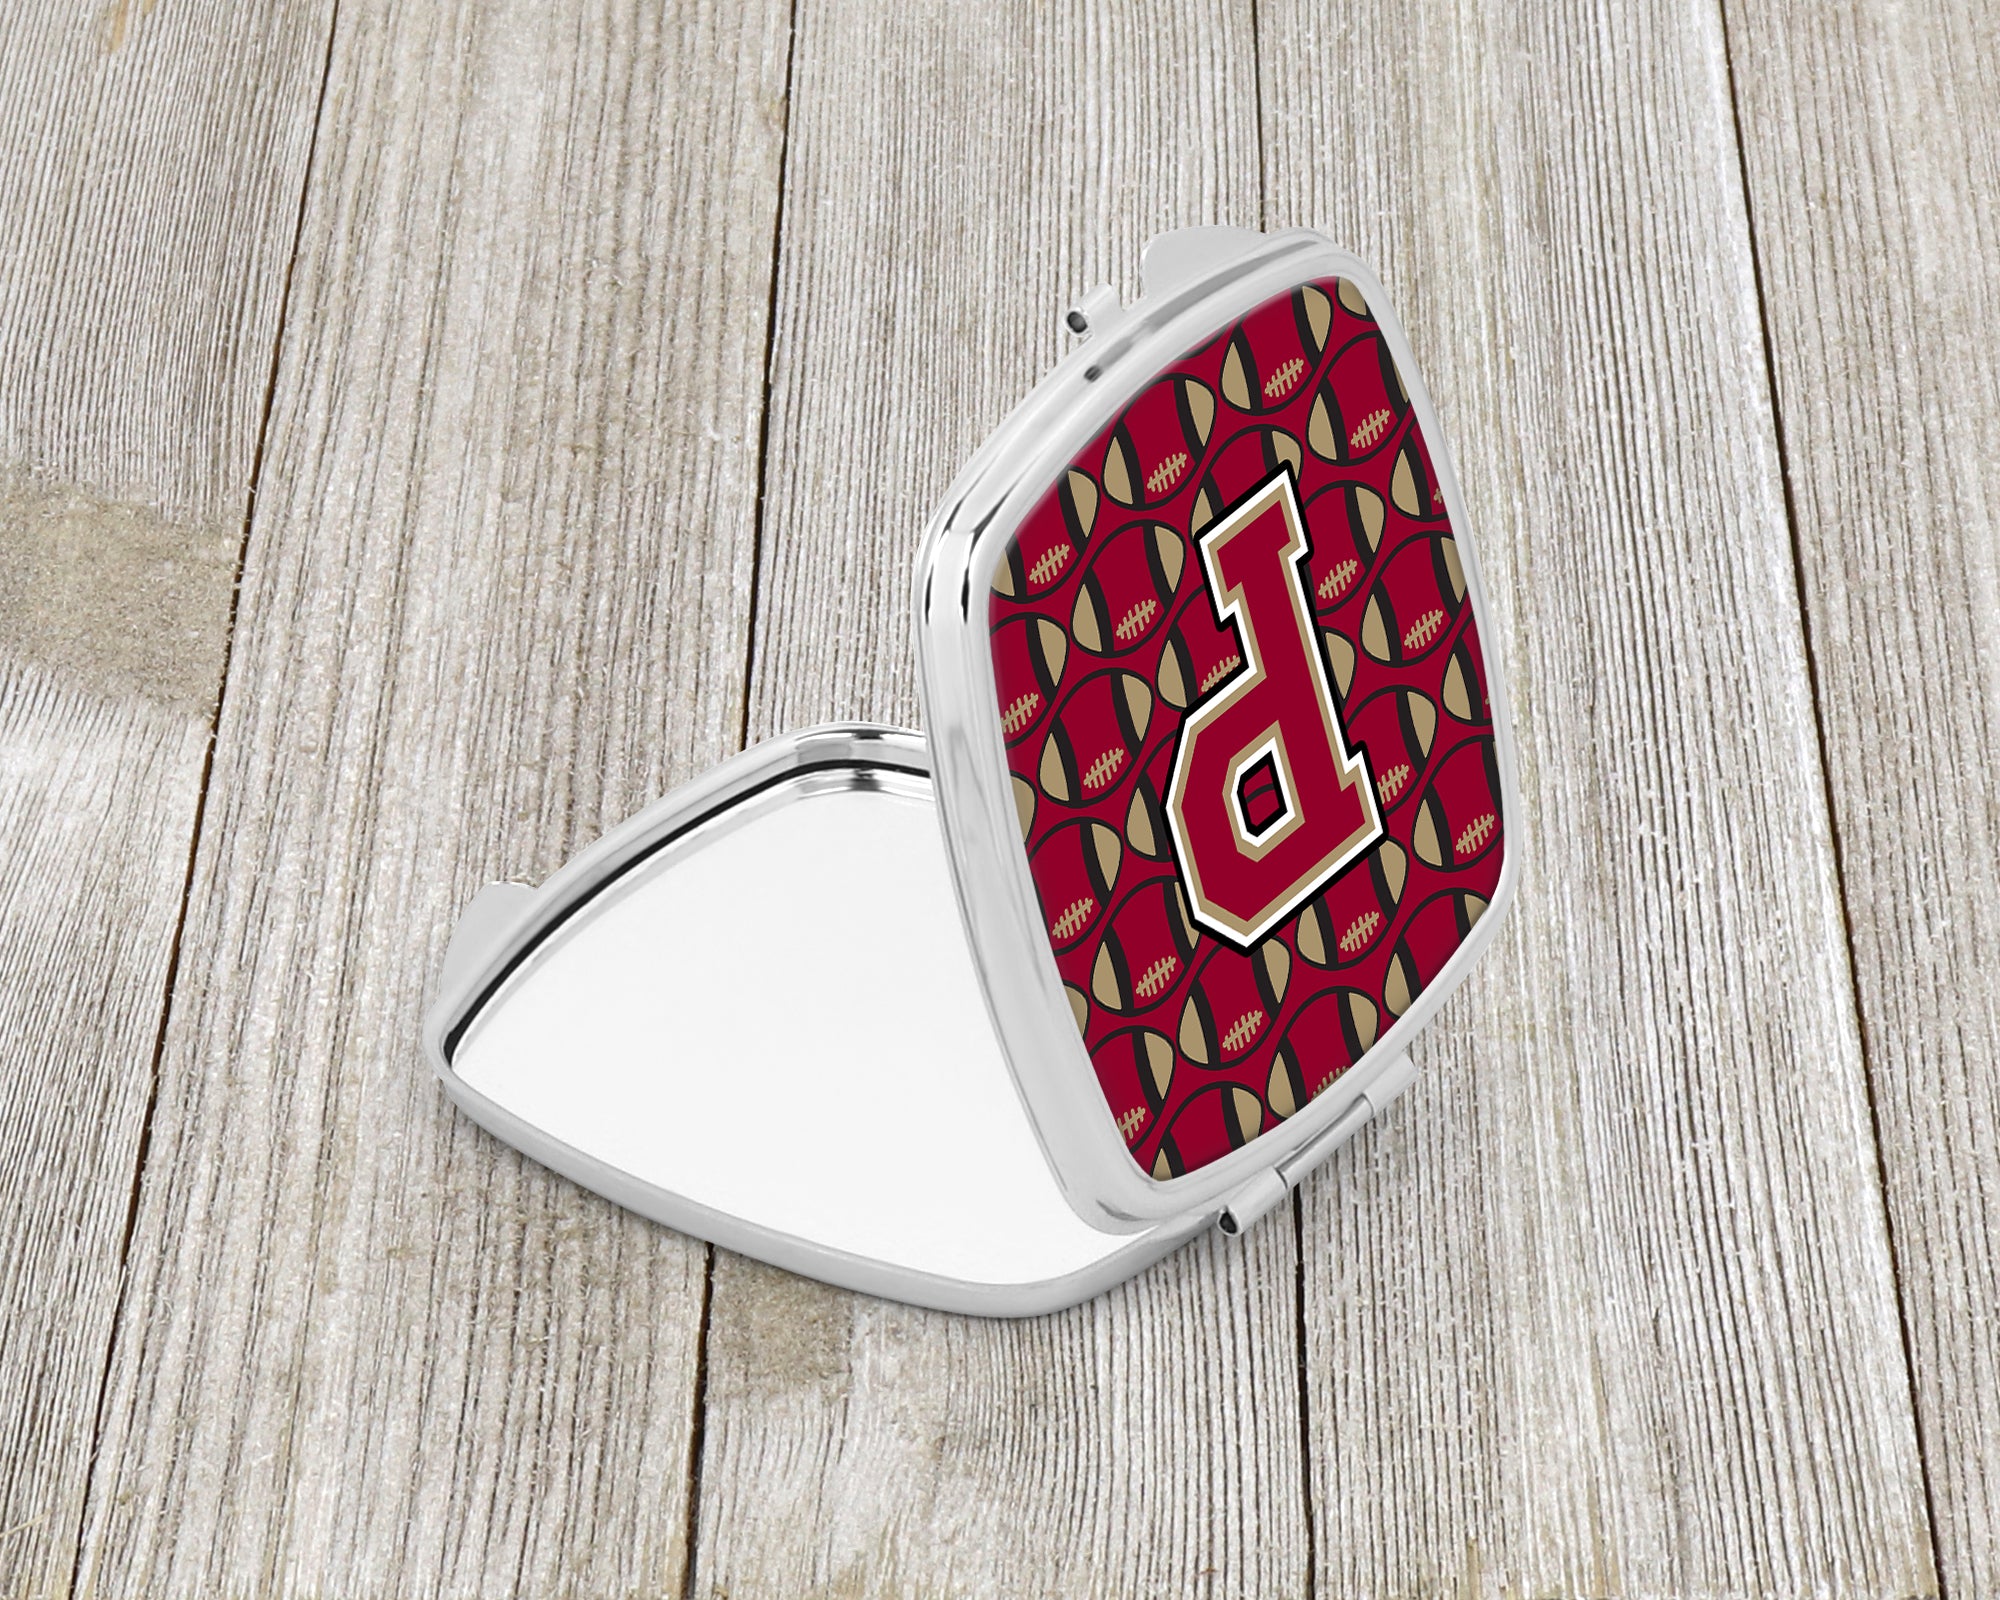 Letter P Football Garnet and Gold Compact Mirror CJ1078-PSCM  the-store.com.